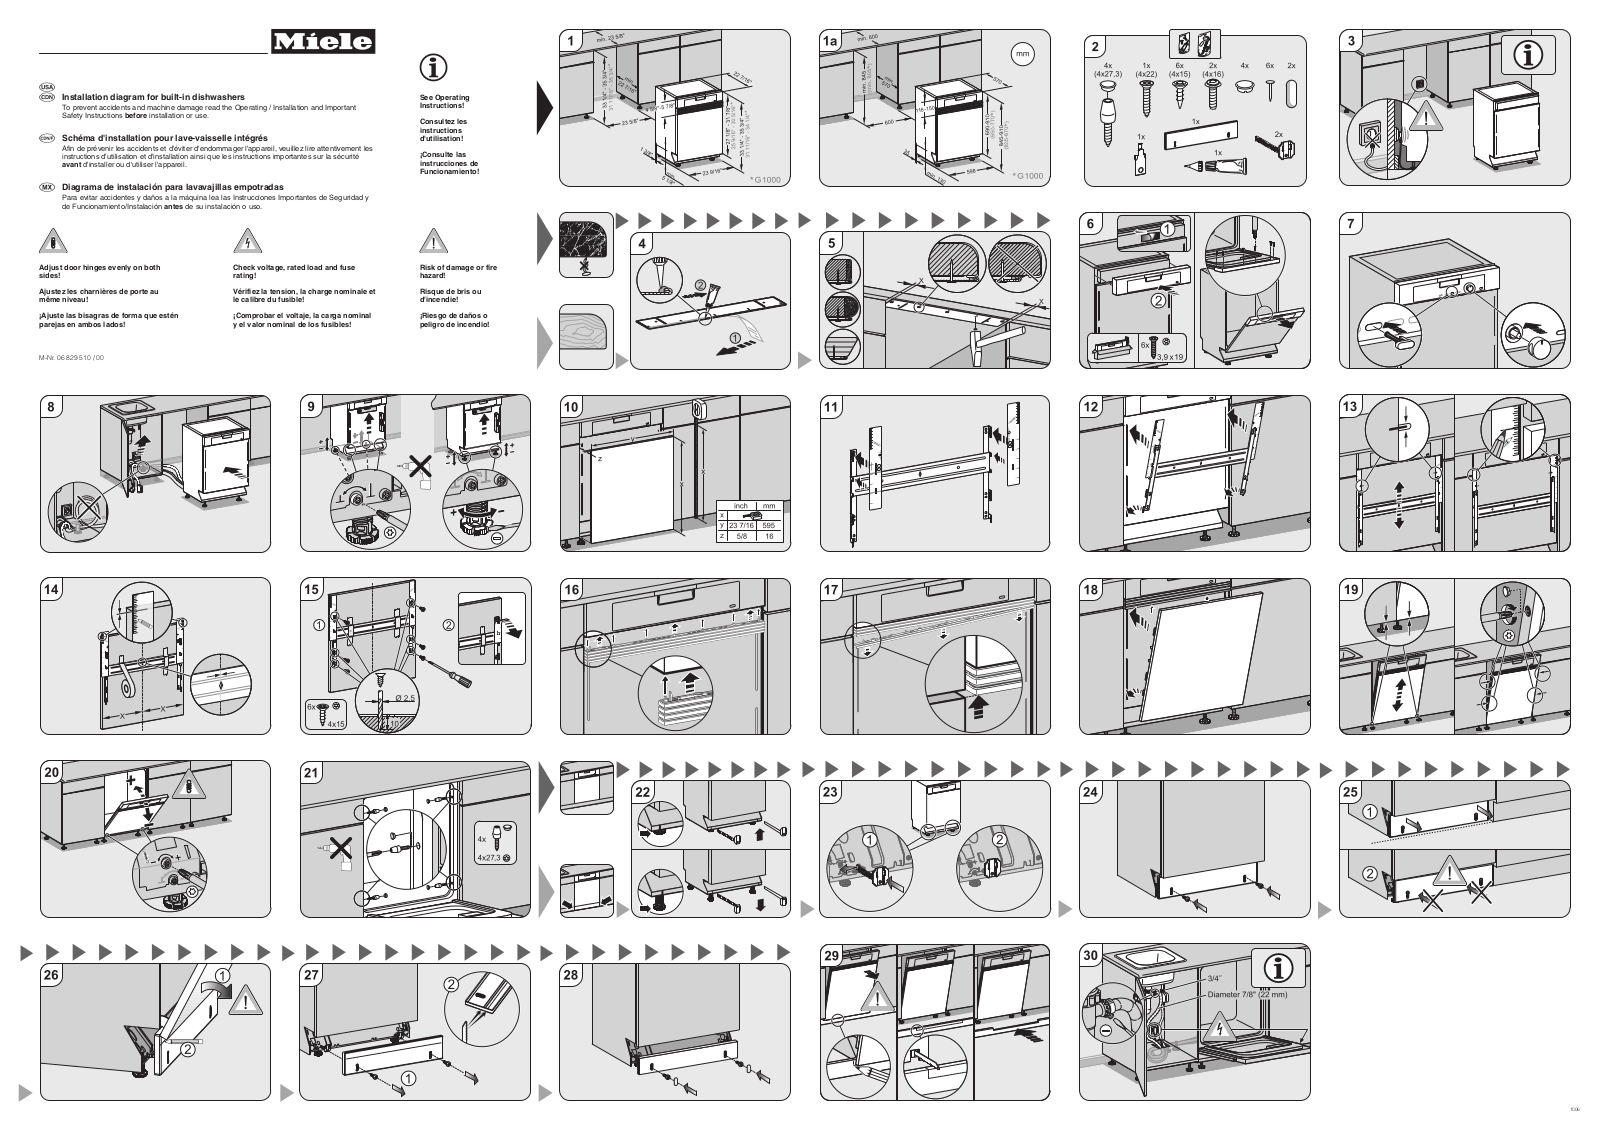 MIELE G 2140 SCI, G 2140I, G 2420 SCI, G 2630 SCI User Manual